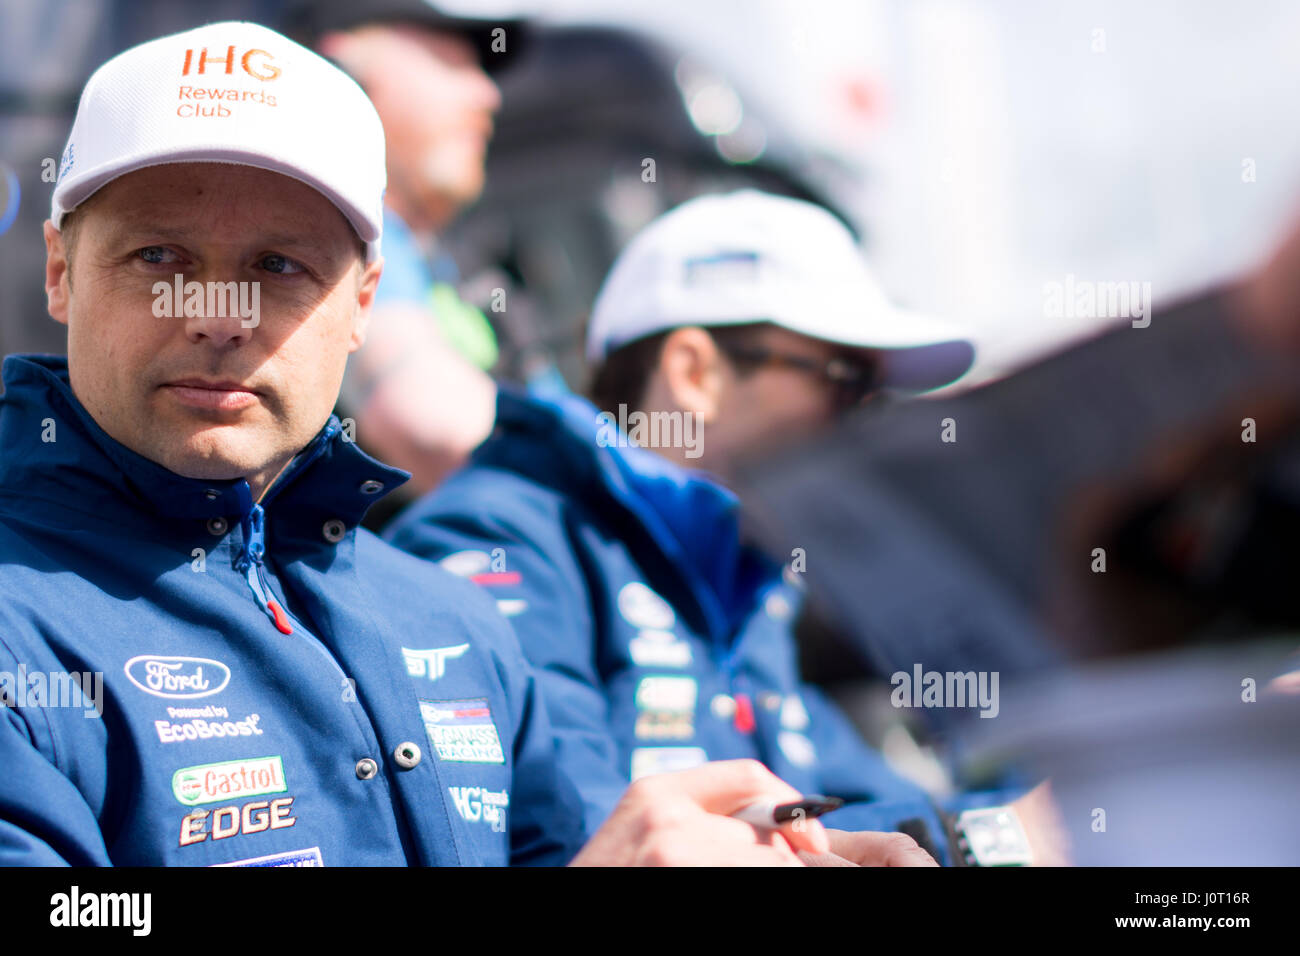 Towcester, Northamptonshire, UK. 16th April, 2017. FIA WEC racing driver Andy Priaulx (GBR) and Ford Chip Ganassi  Team UK during the 6 Hours of Silverstone of the FIA World Endurance Championship Autograph session at Silverstone Circuit Photo by Gergo Toth / Alamy Live News Stock Photo